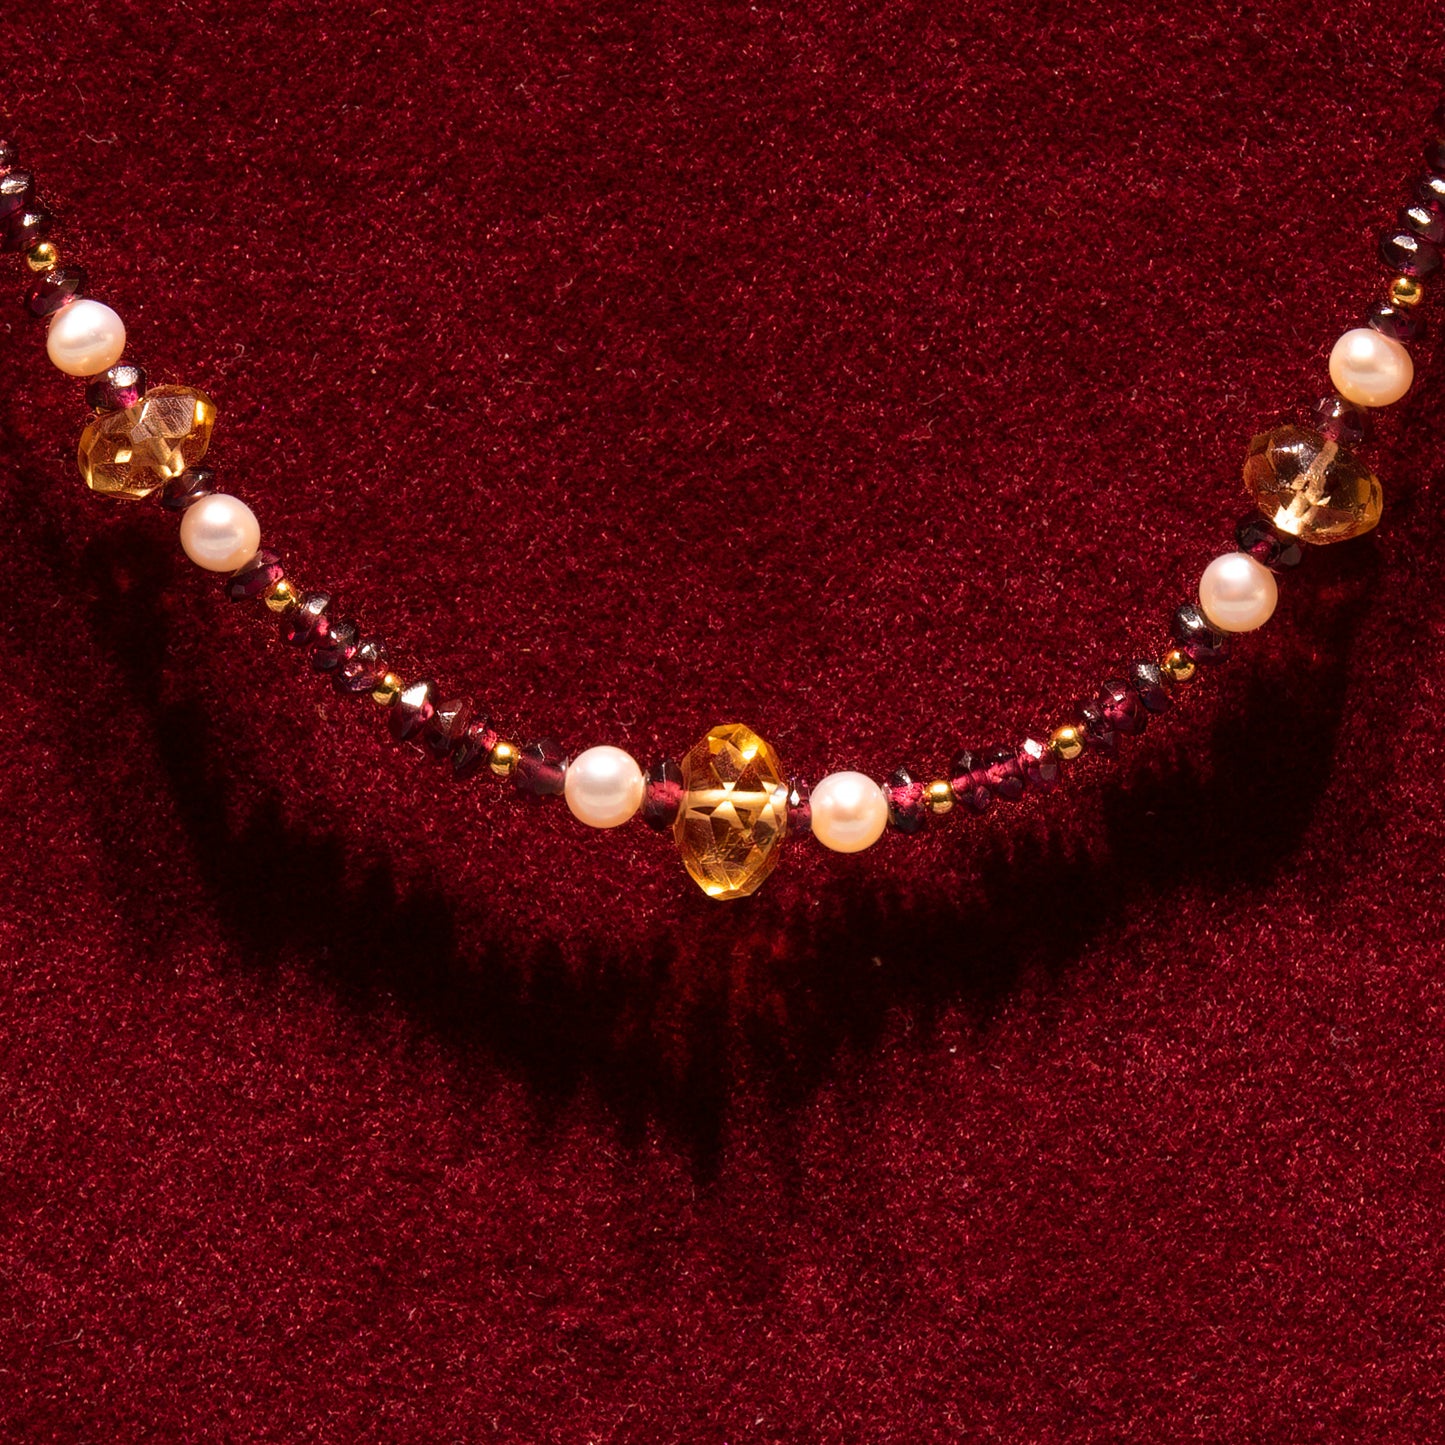 Garnets,citrines,pearls and 18K gold necklace.